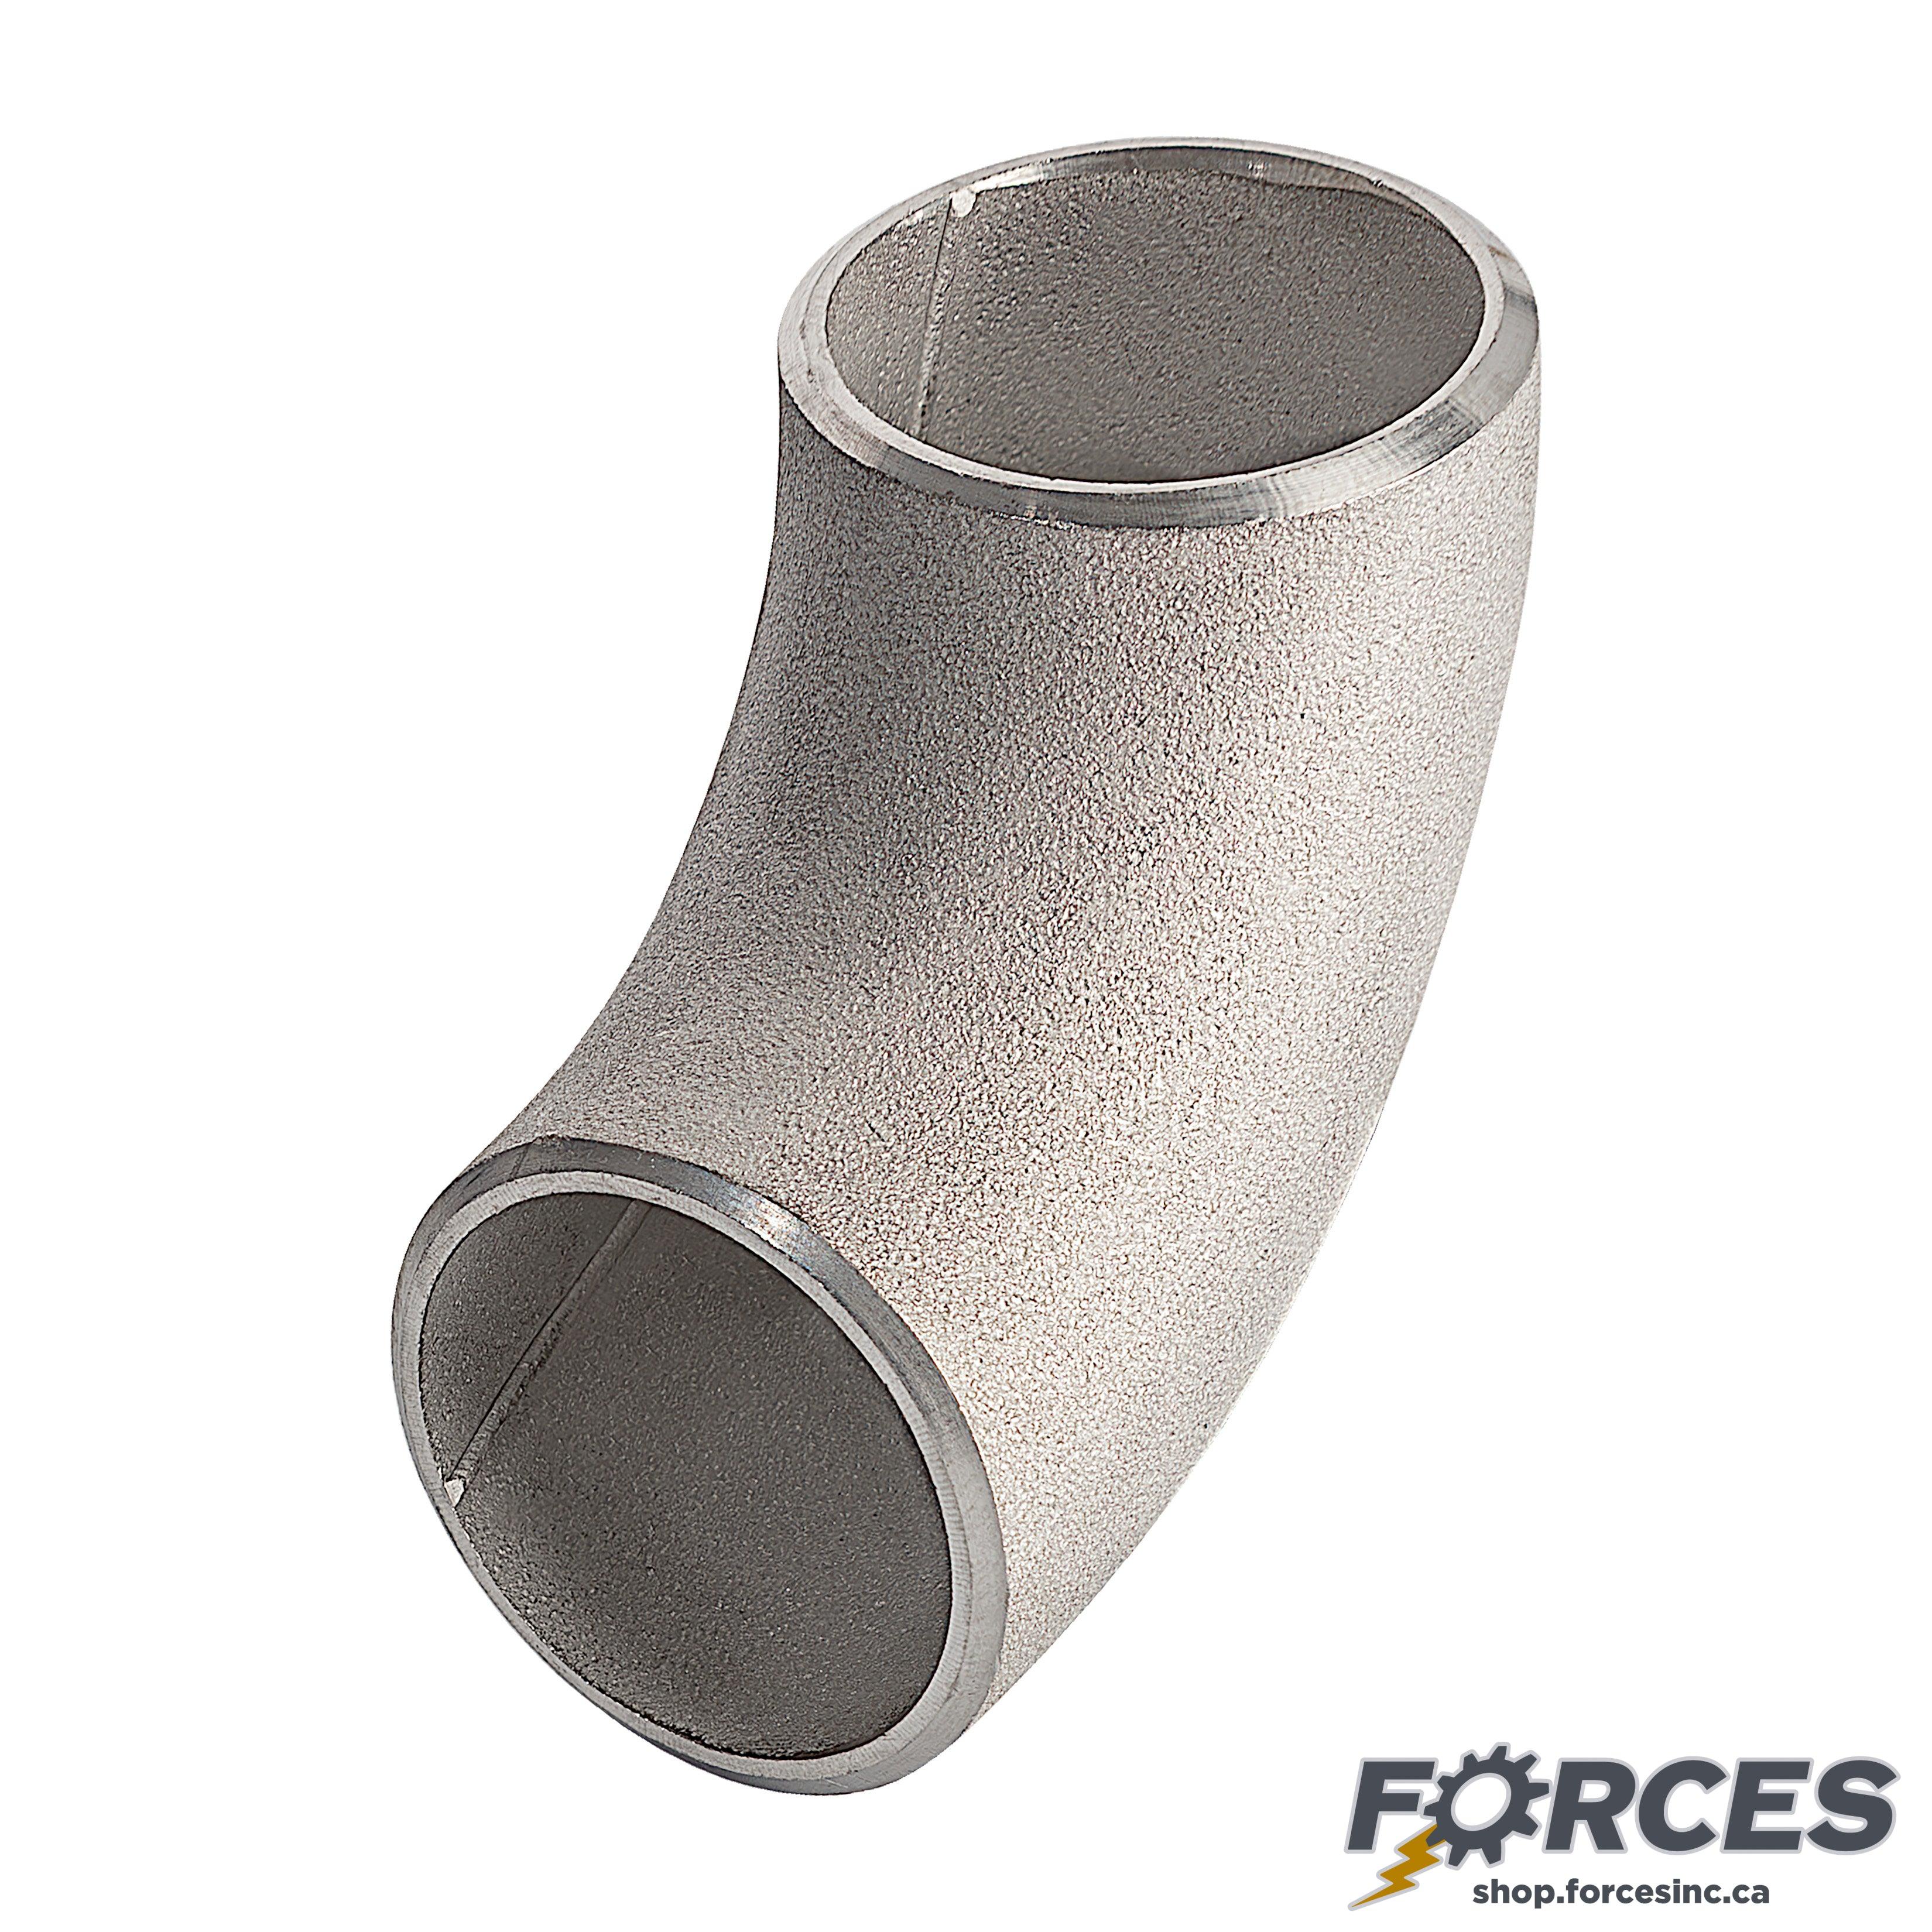 1/2" Elbow 90° SCH 40 Butt Weld - Stainless Steel 316 - Forces Inc